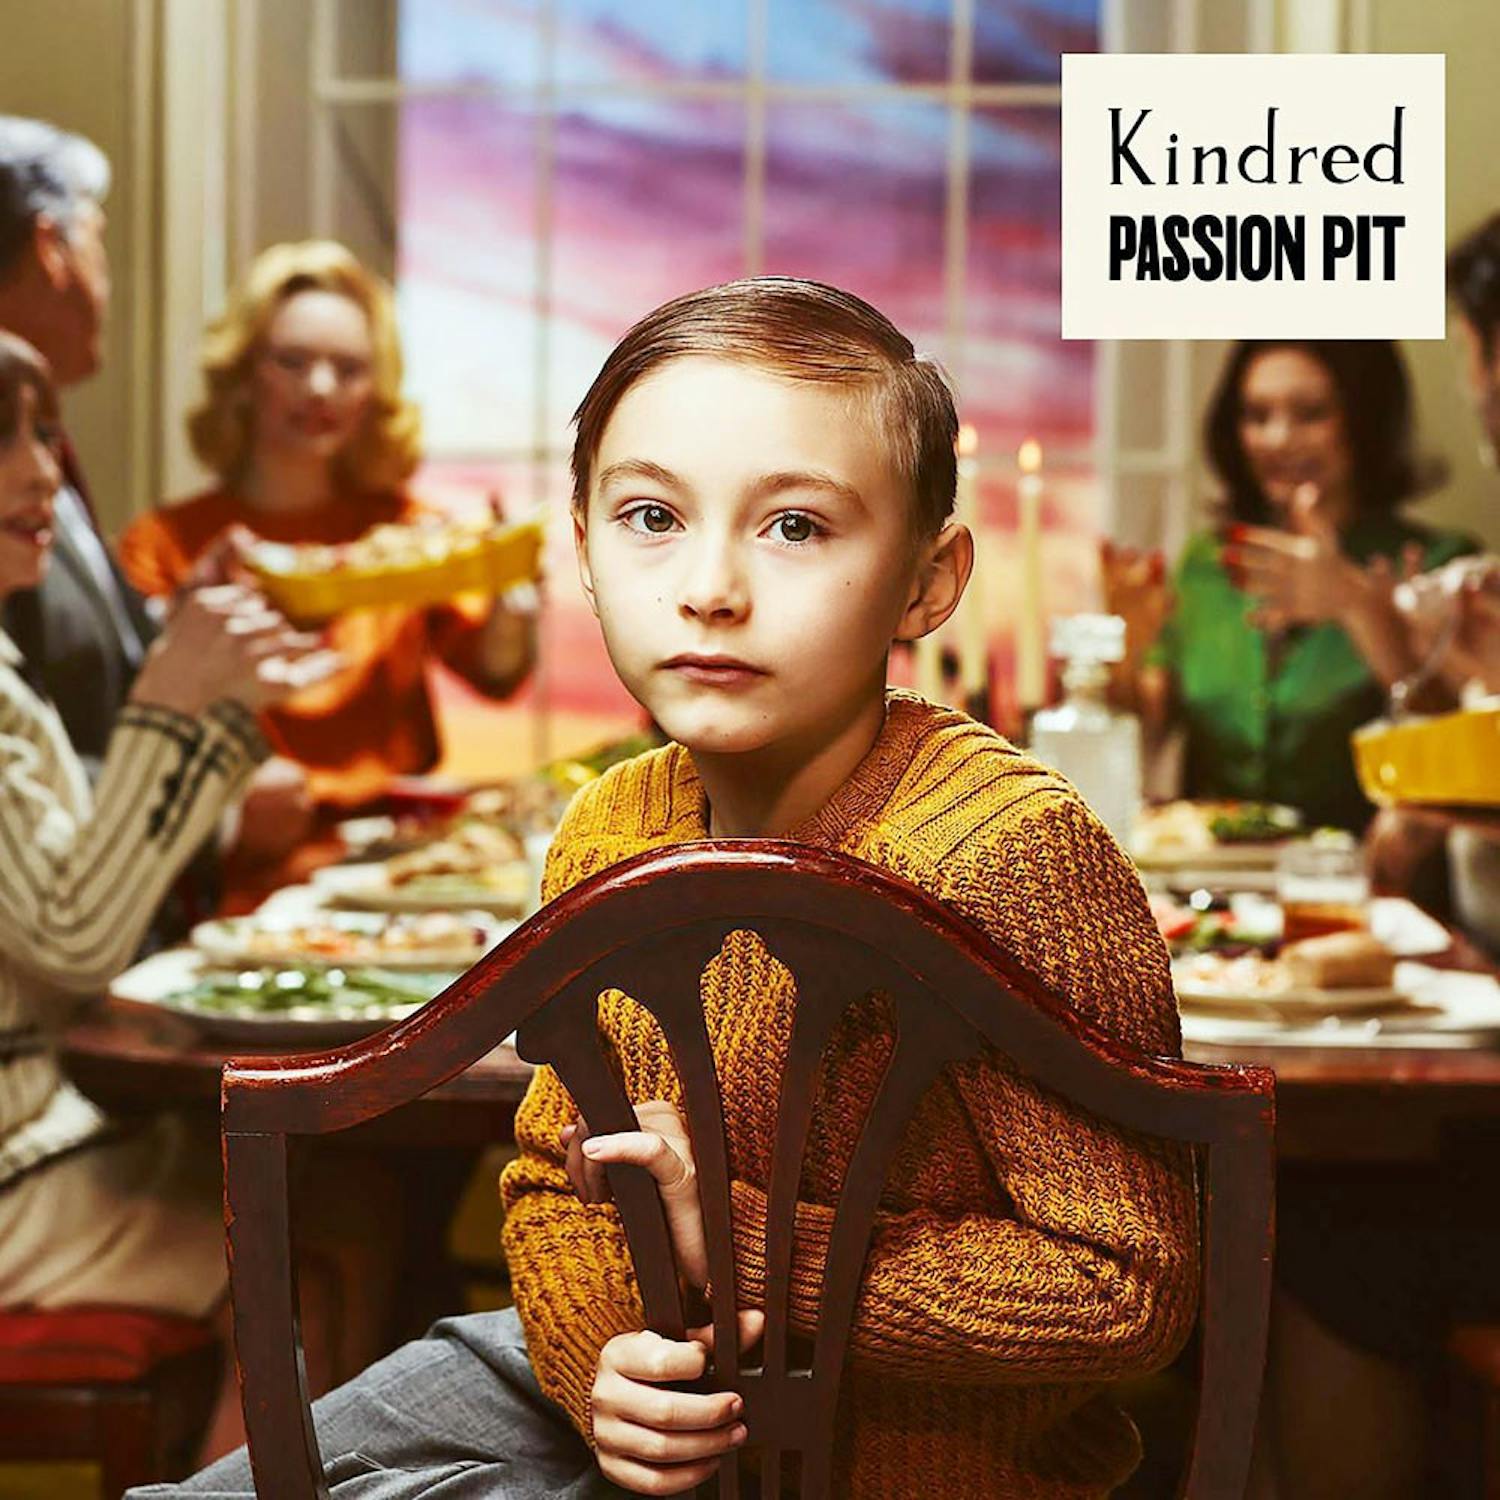 Passion Pit’s latest album puts the group’s emotions on the backburner as it opens with more pop-driven tracks.